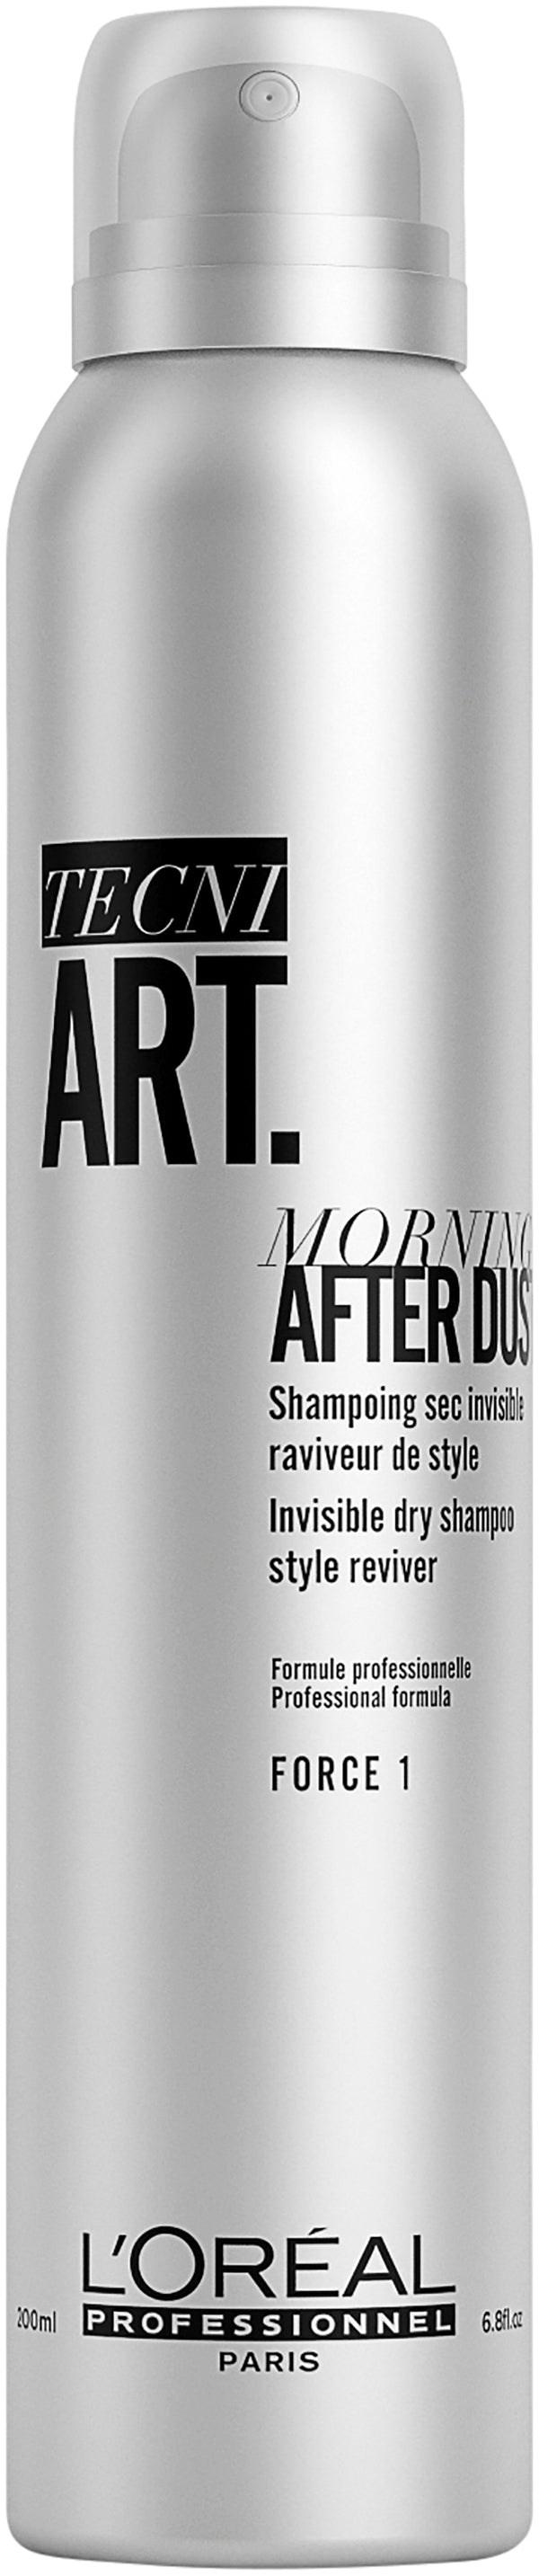 L'Oreal Professionnel Tecni.ART Morning After Dust 200ml